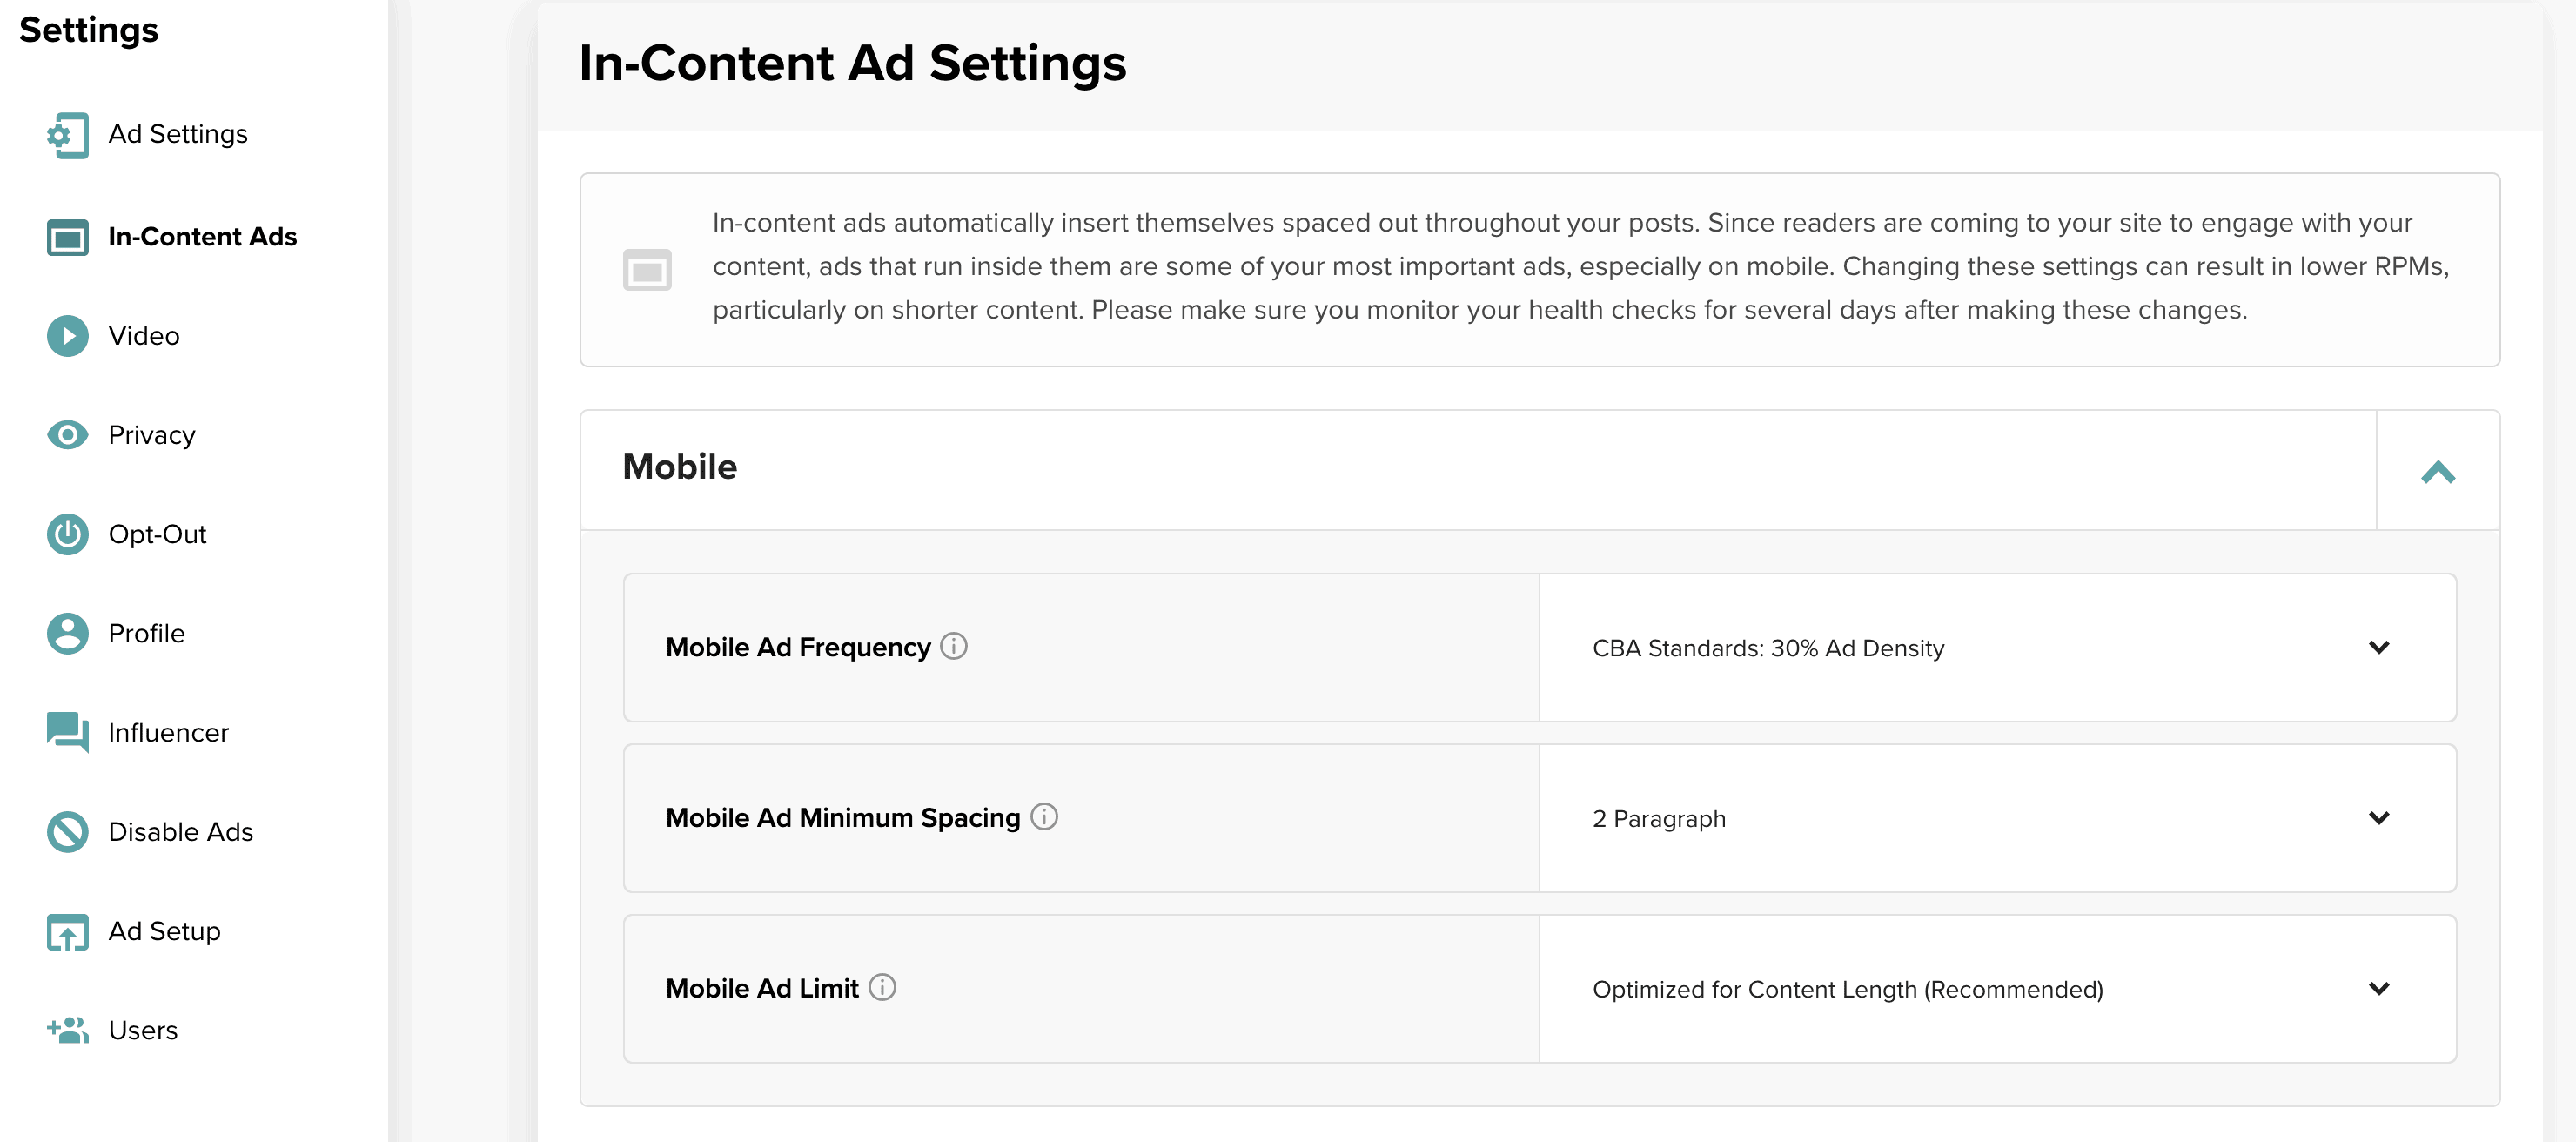 Screenshot of In-Content Ad Settings page in the Mediavine Dashboard